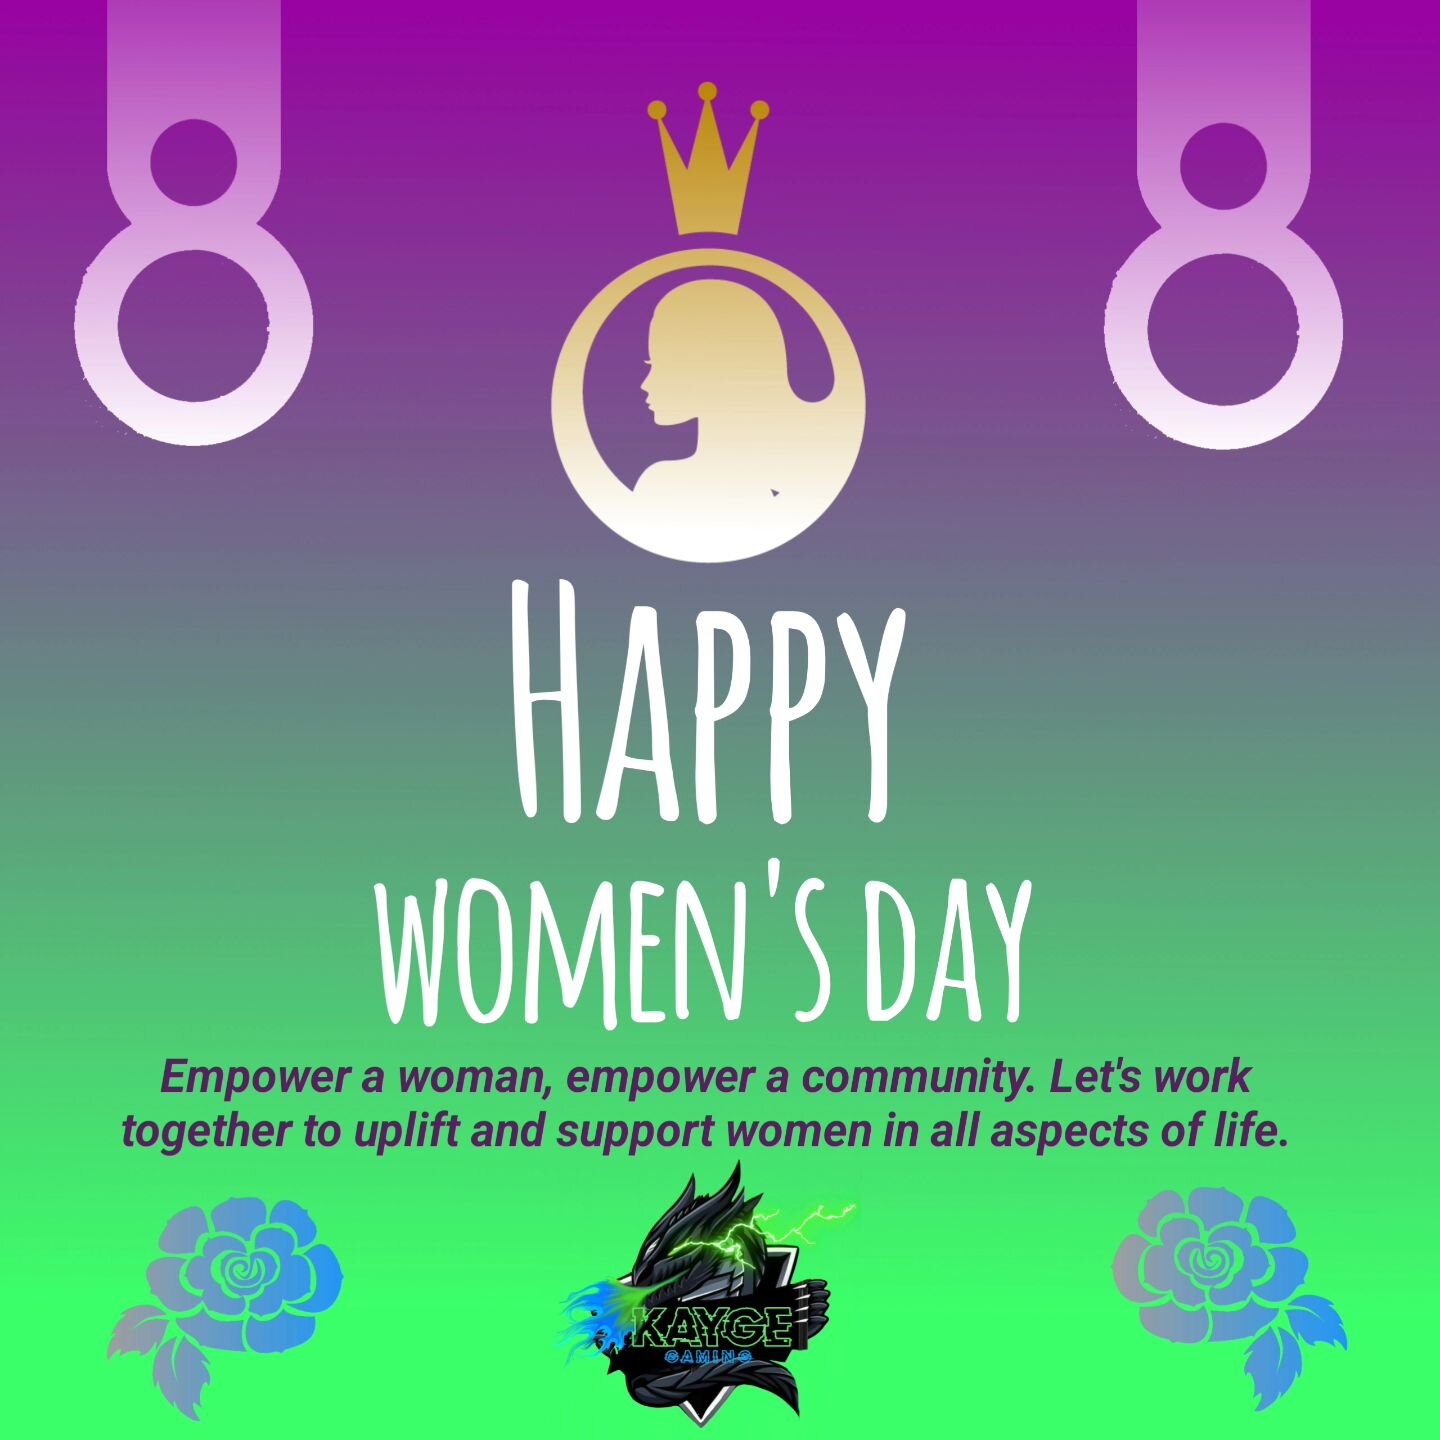 Happy women's day 🙌🏾 you are loved #kaygegaming

#explorepage #explore #gamingcommunity #womensday #california #209times #stocktonca #209